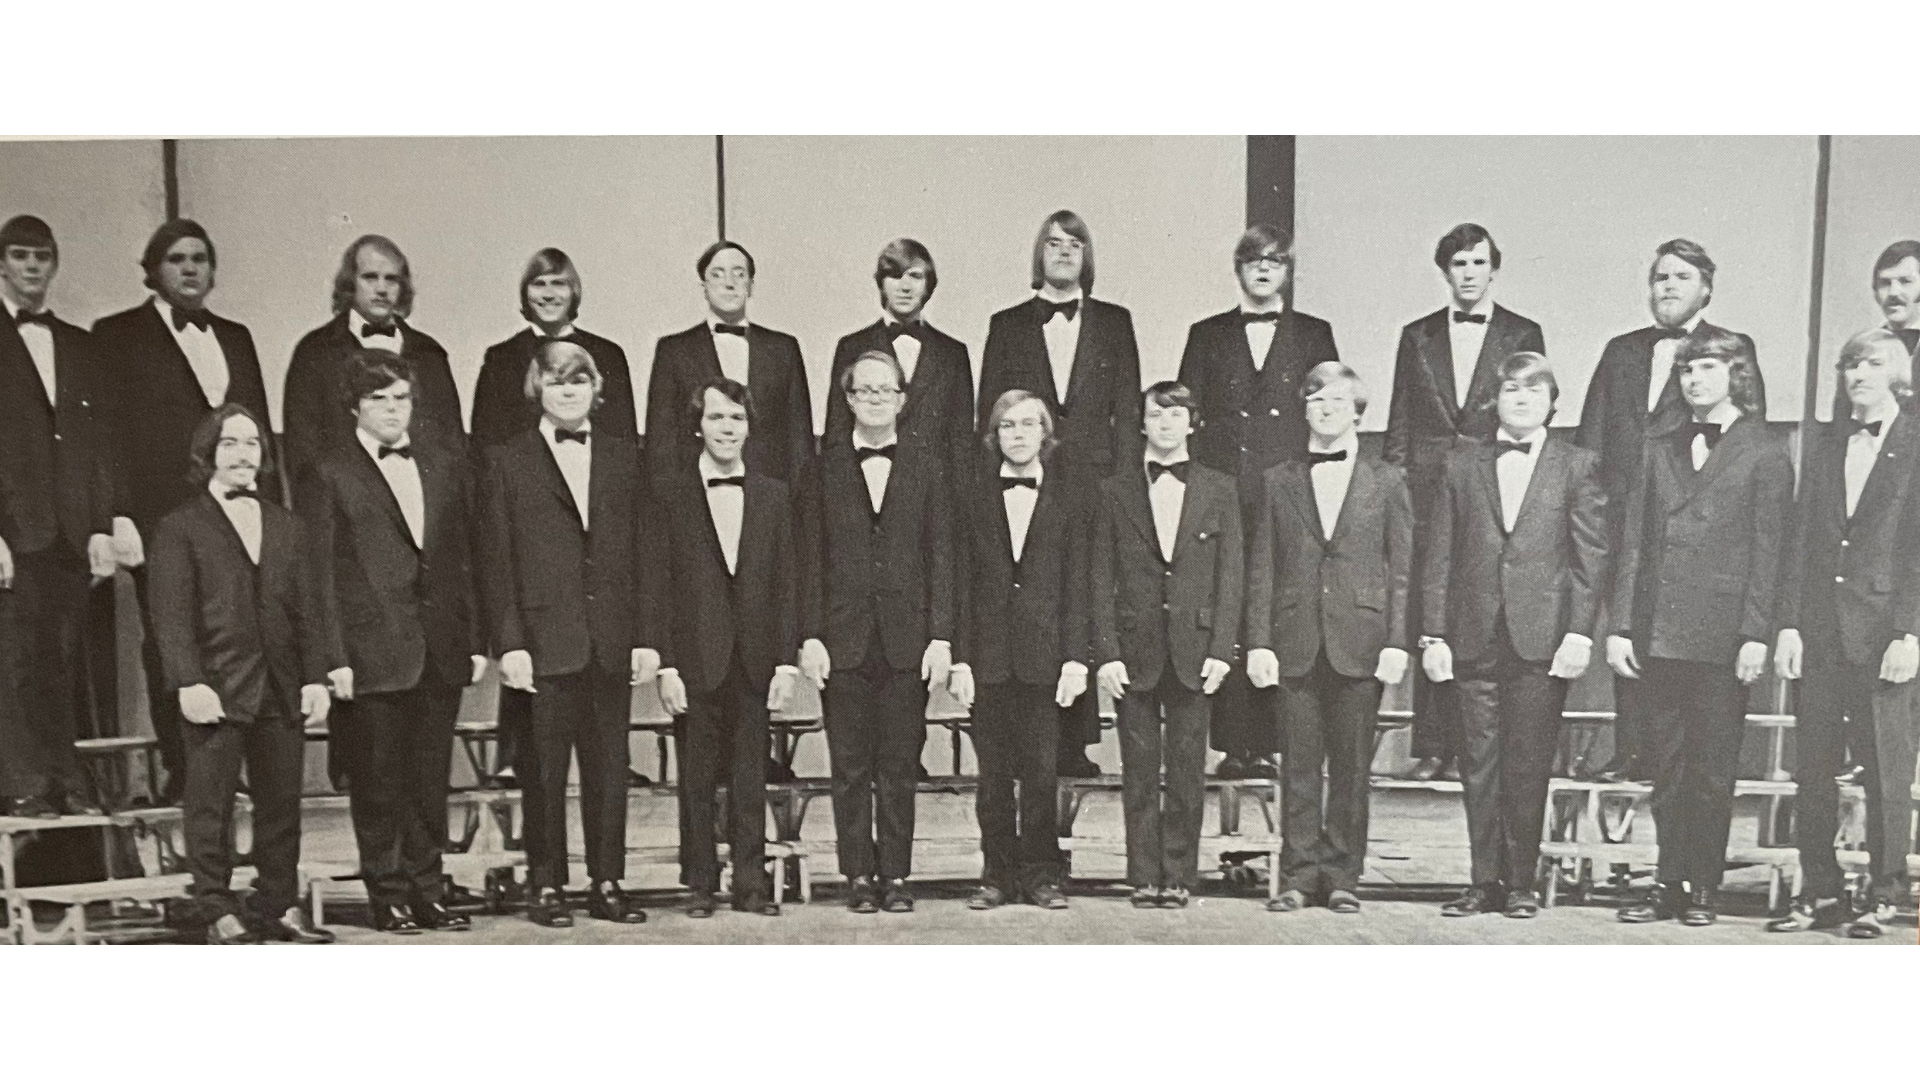 Historical photo of A-State Mens Choir from the 1960s.